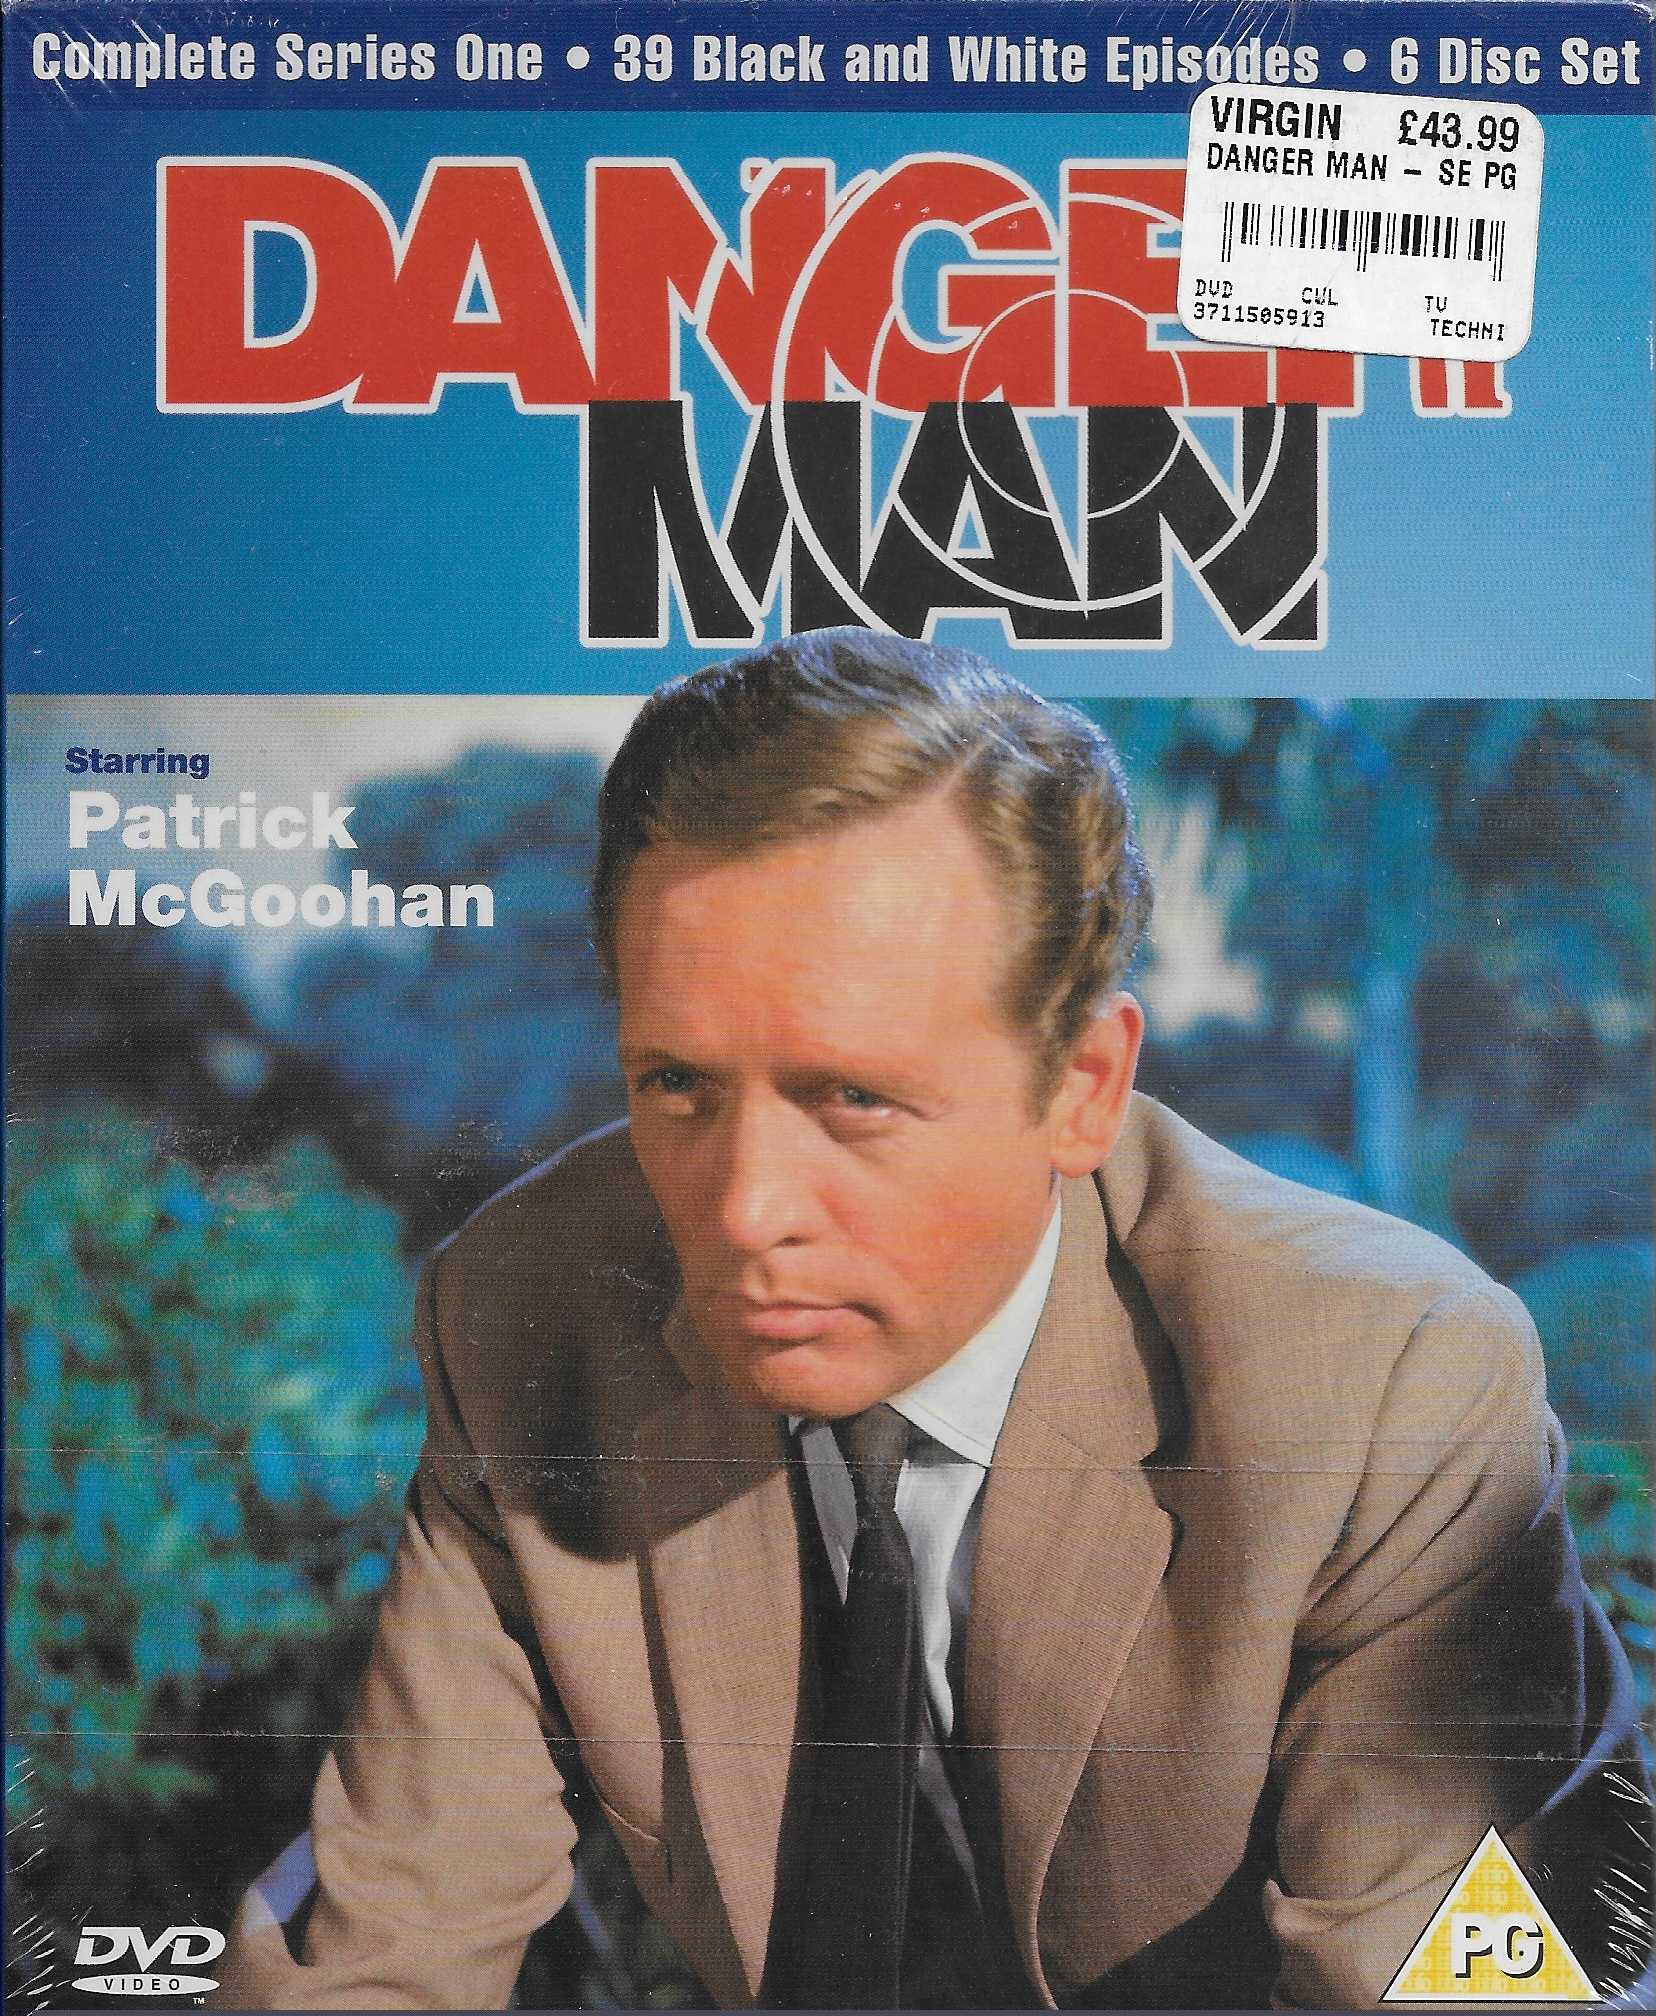 Picture of 37115 05913 Dangerman - Complete series 1 by artist Various from ITV, Channel 4 and Channel 5 dvds library